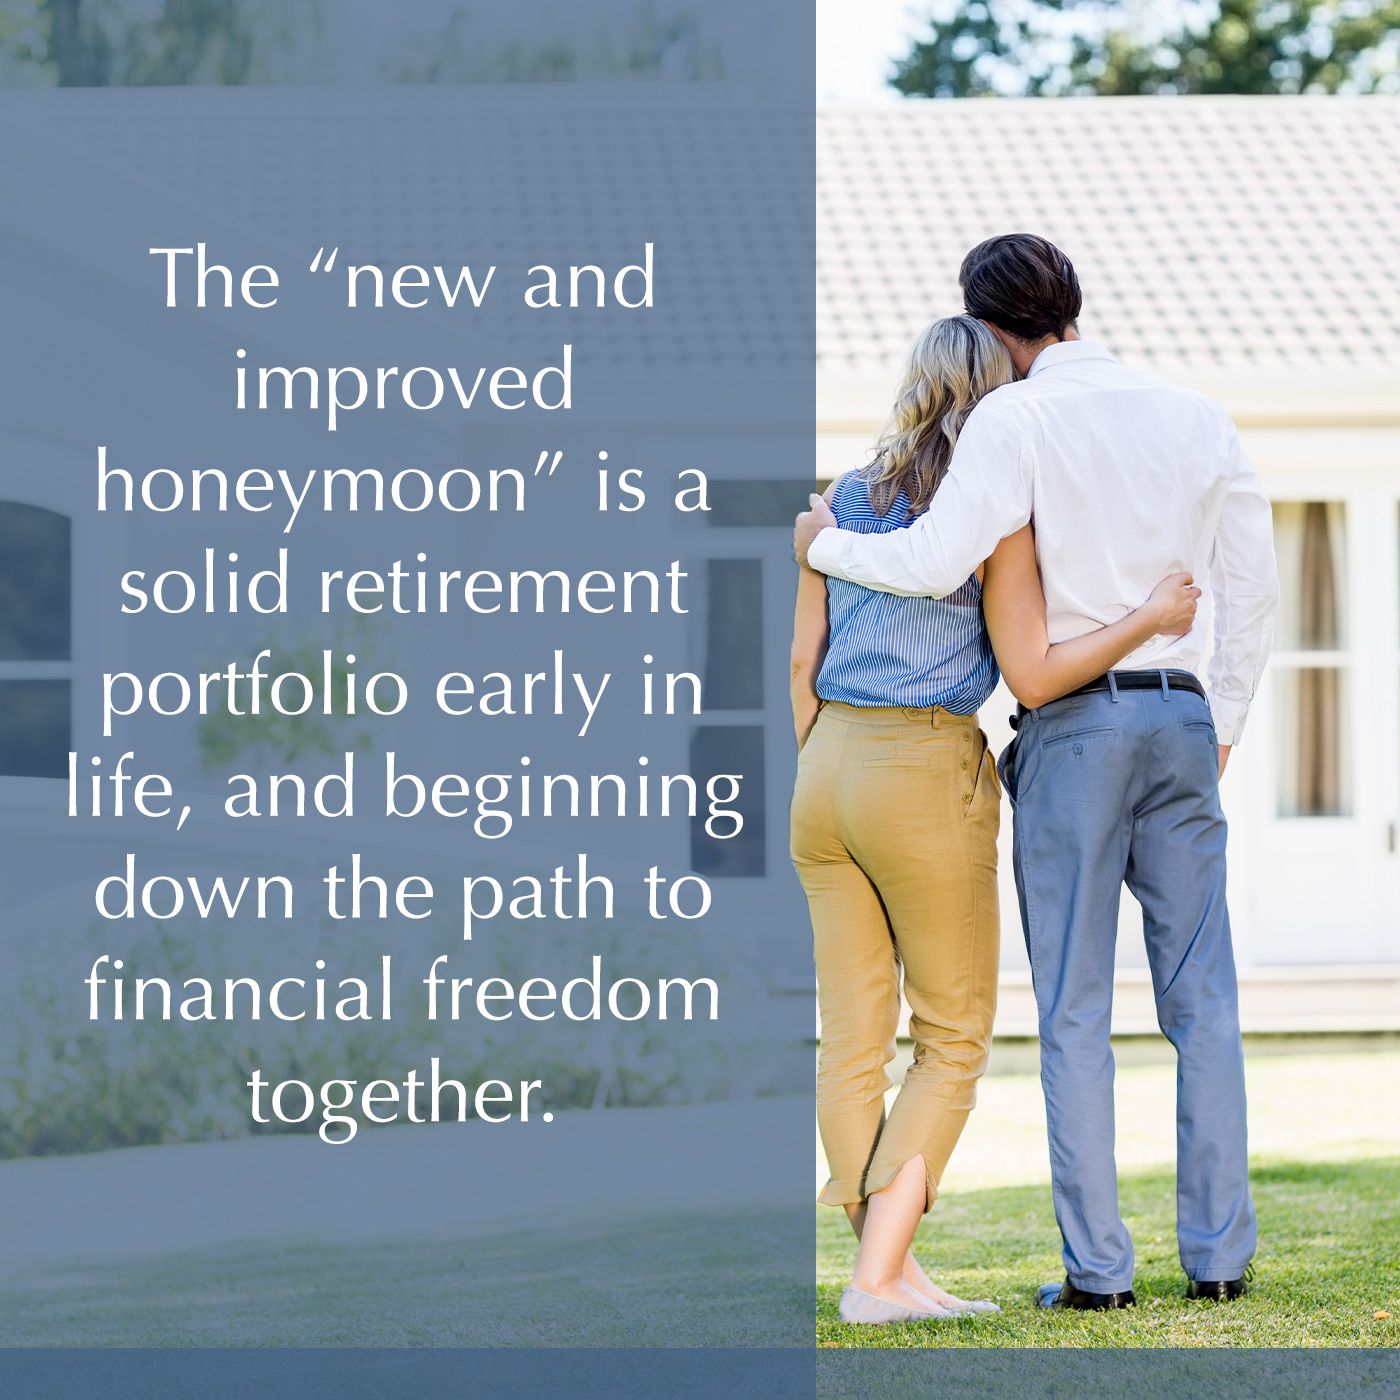 Real Estate Investing Strategies For Married Couples Will Never Be The Same.